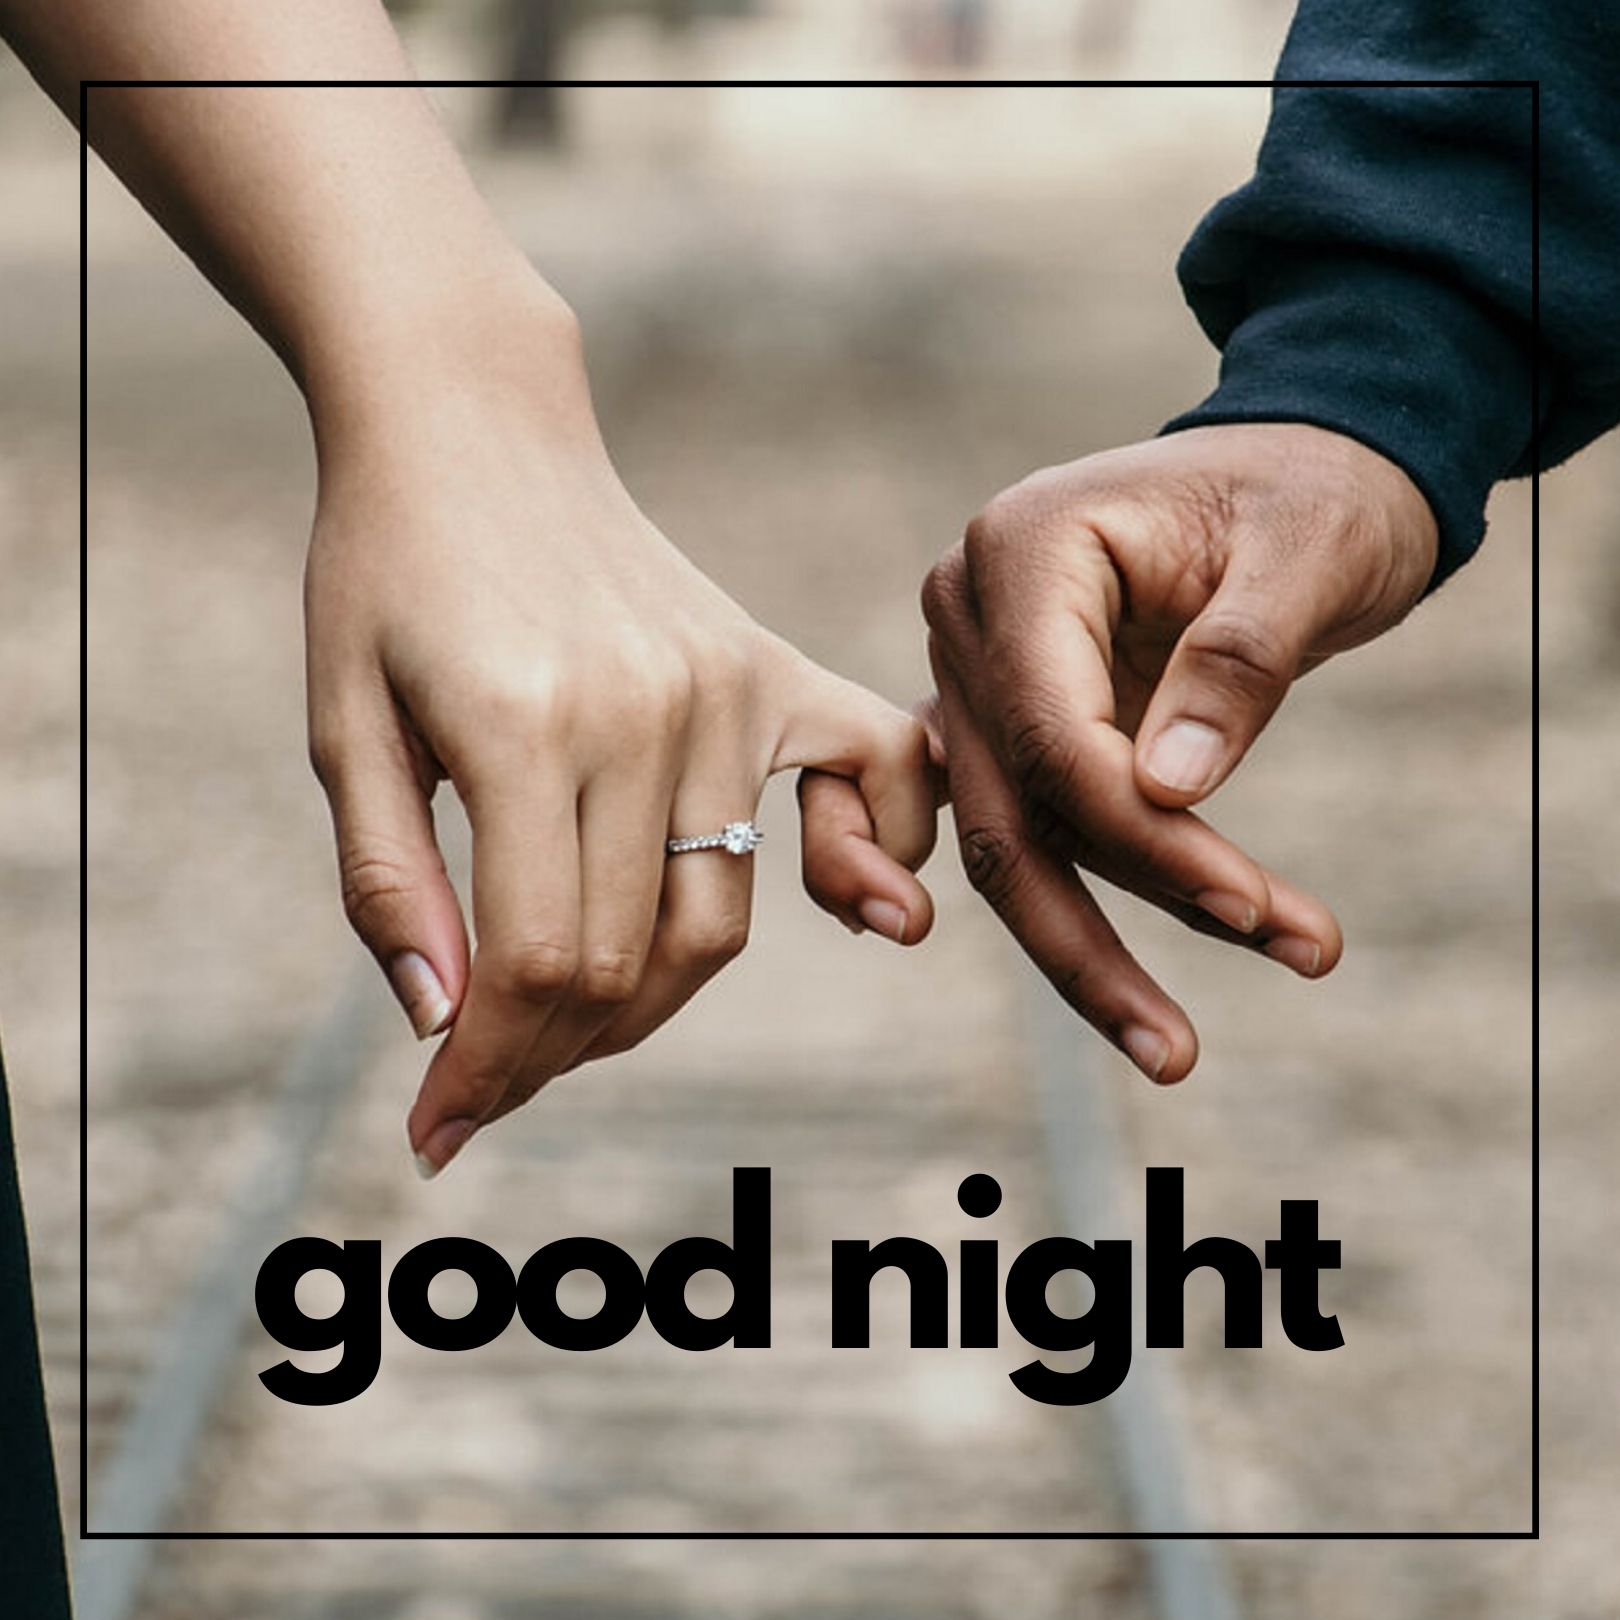 🔥 Good Night Romantic Couples Image Download free - Images SRkh